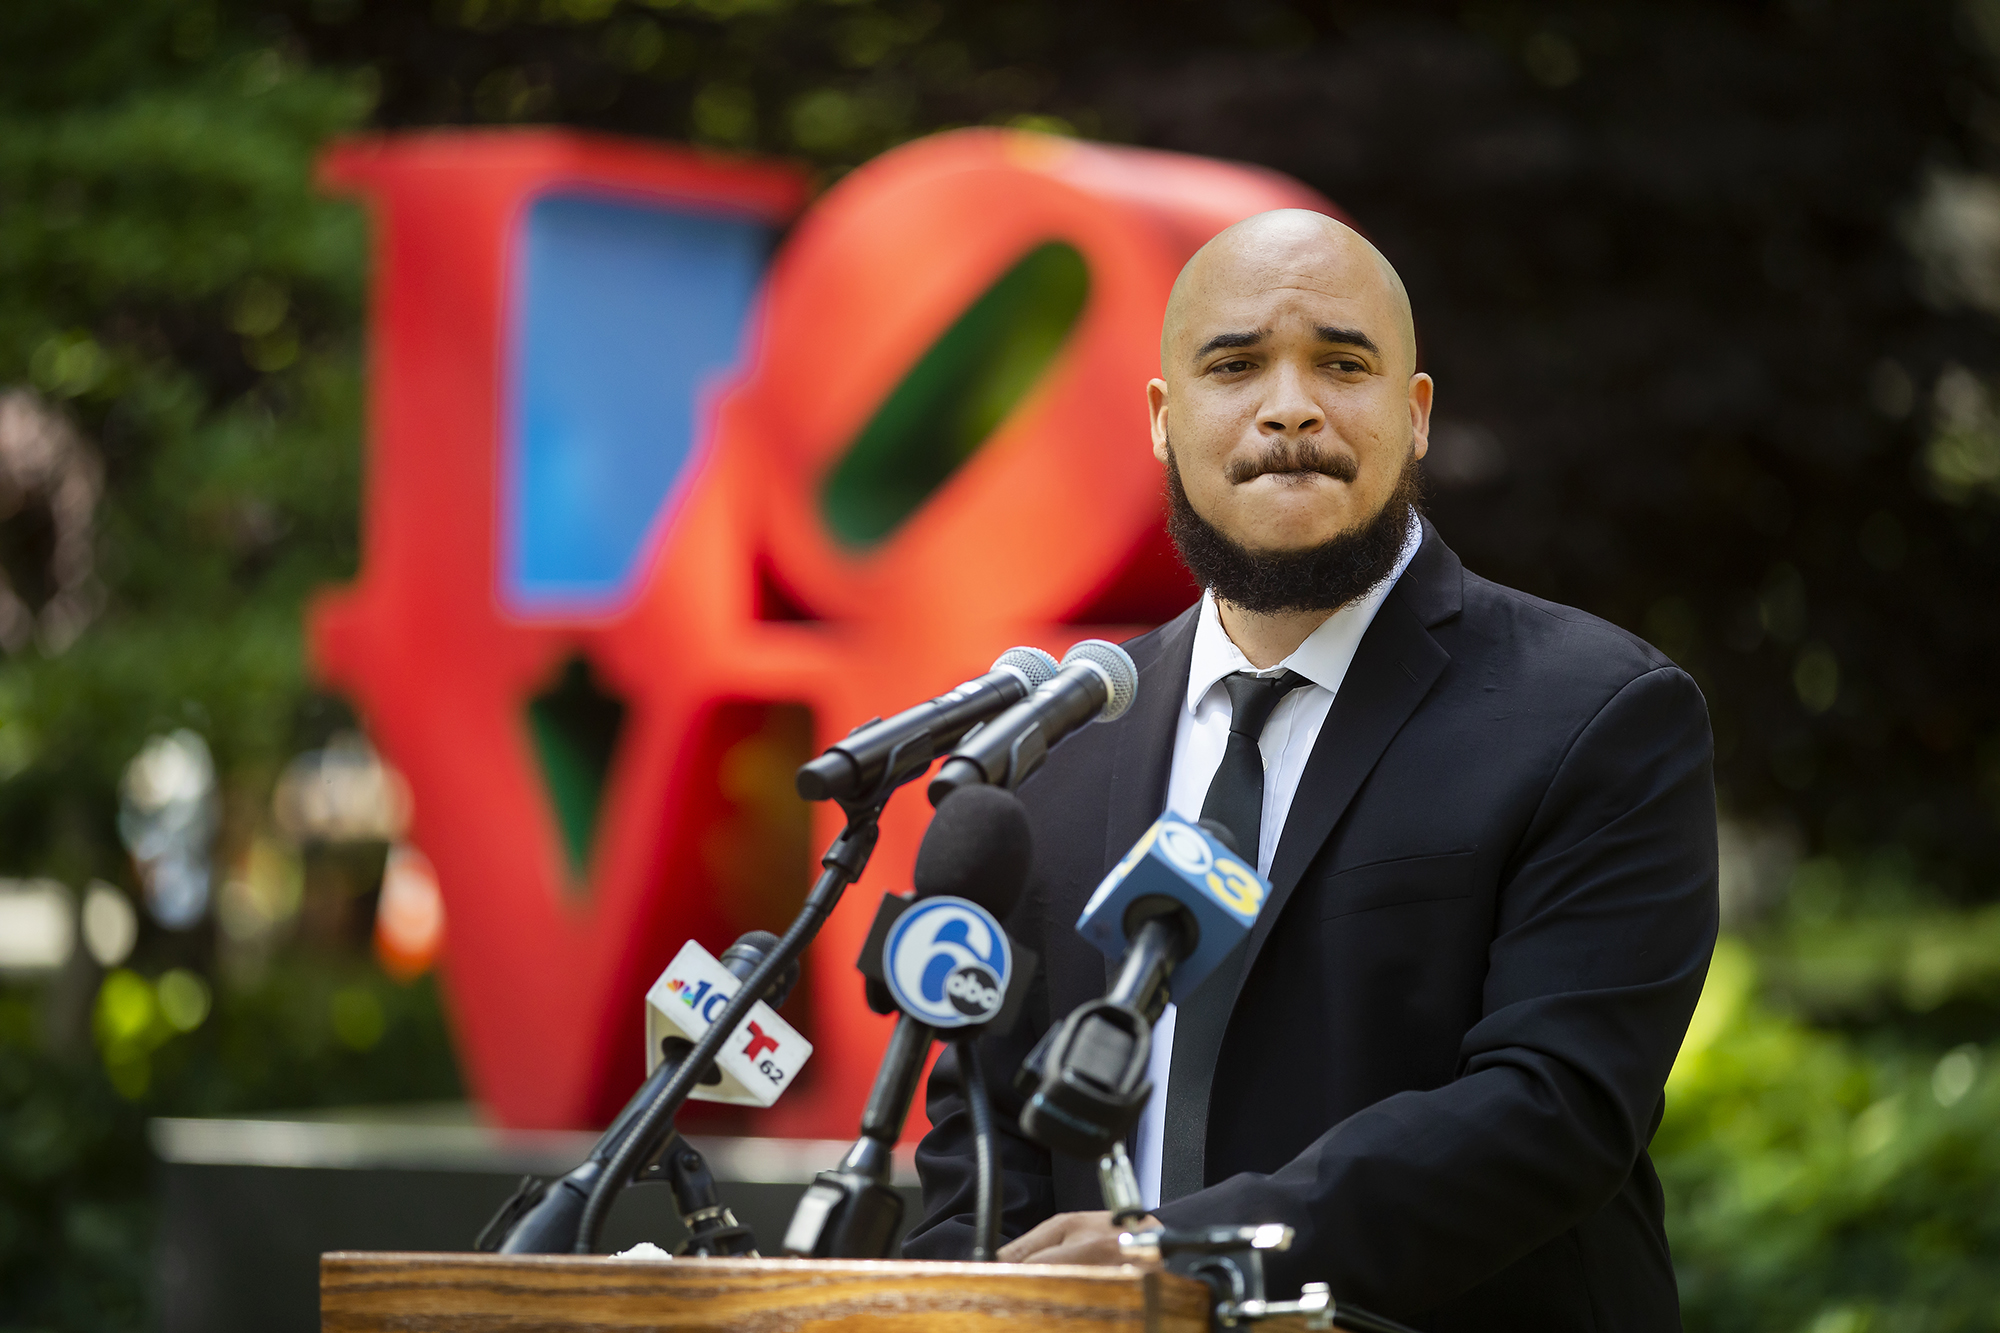 Chaz Howard speaks at a podium in front of the LOVE statue on Penn’s campus.